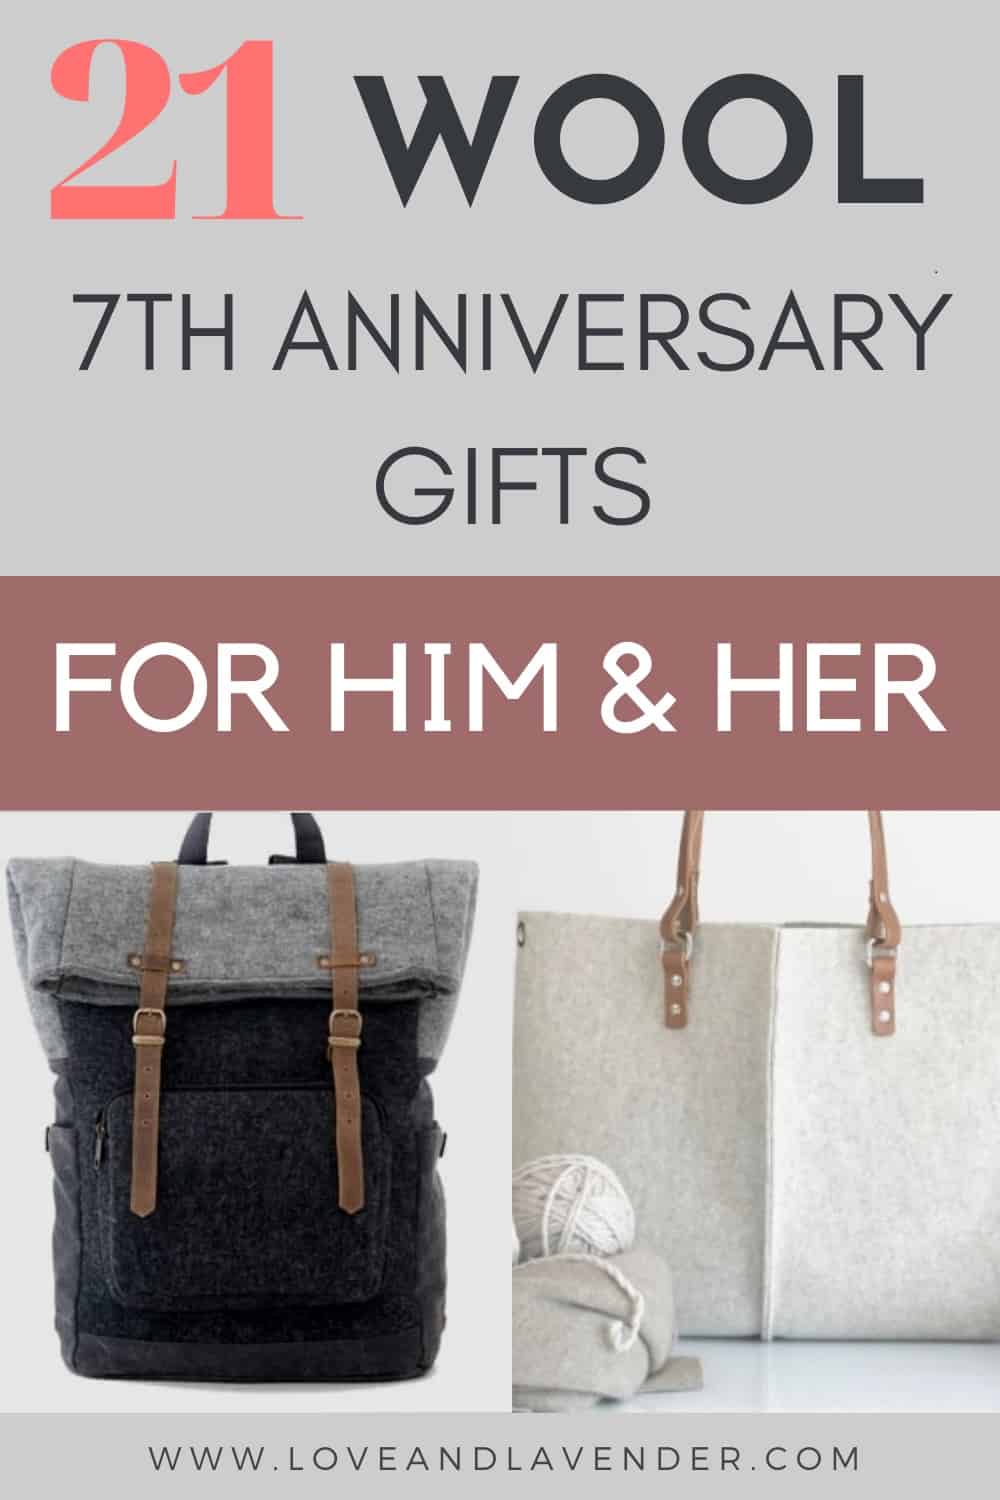 21 Wool Gifts To Warm Your 7th Anniversary,Meatloaf Recipe Betty Crocker